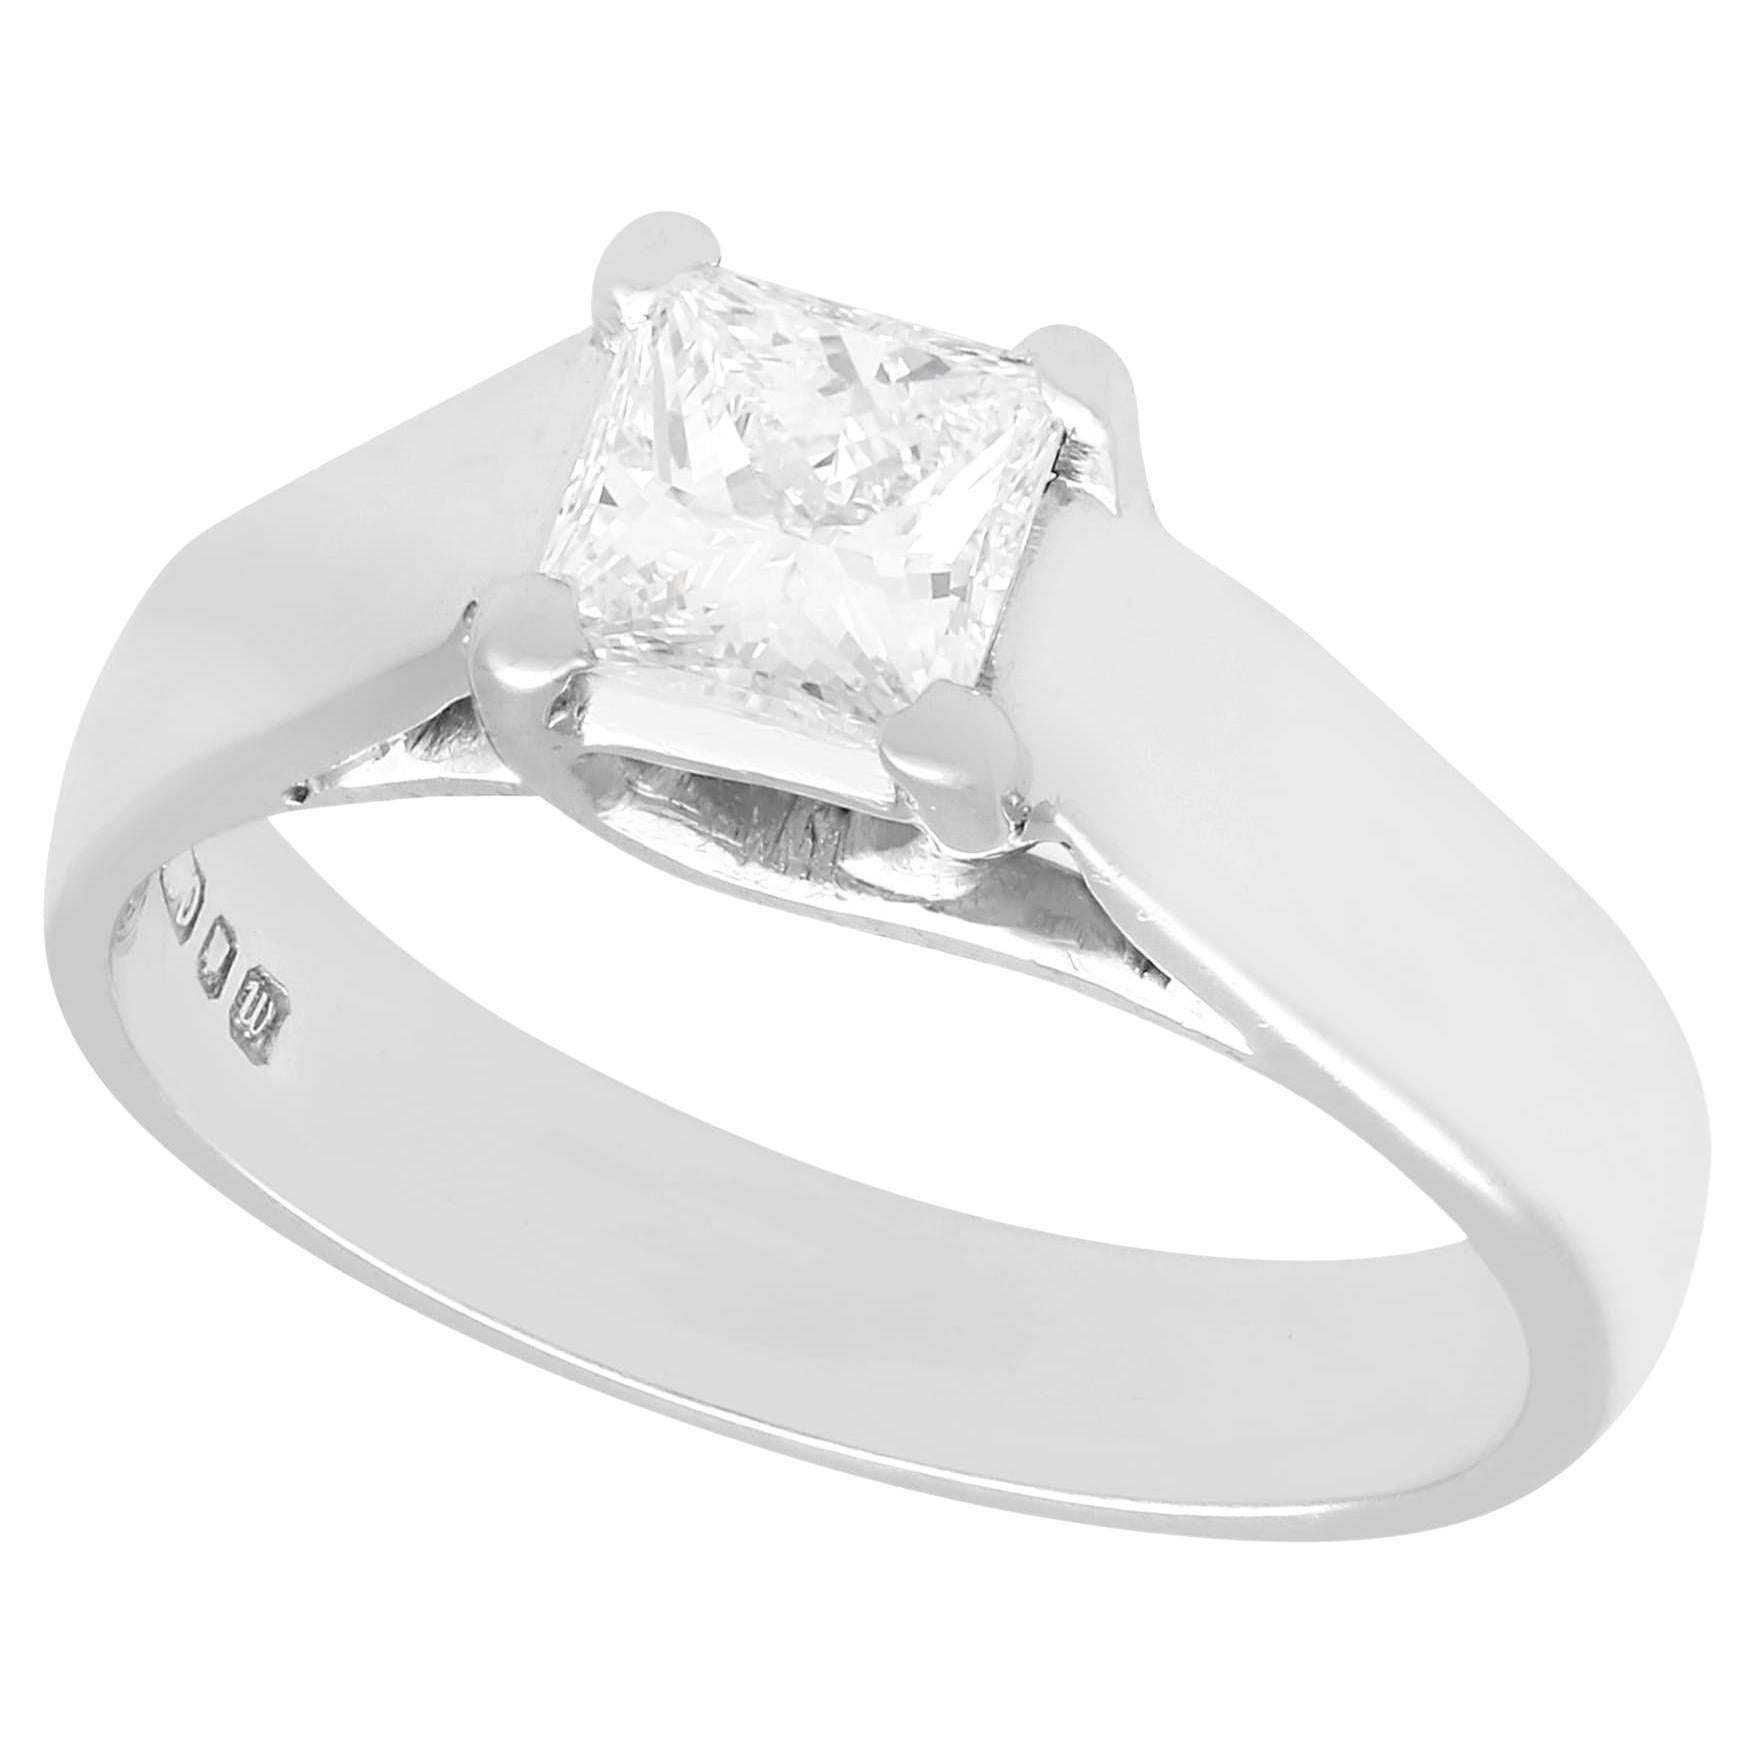 1990s Diamond and White Gold Solitaire Engagement Ring For Sale